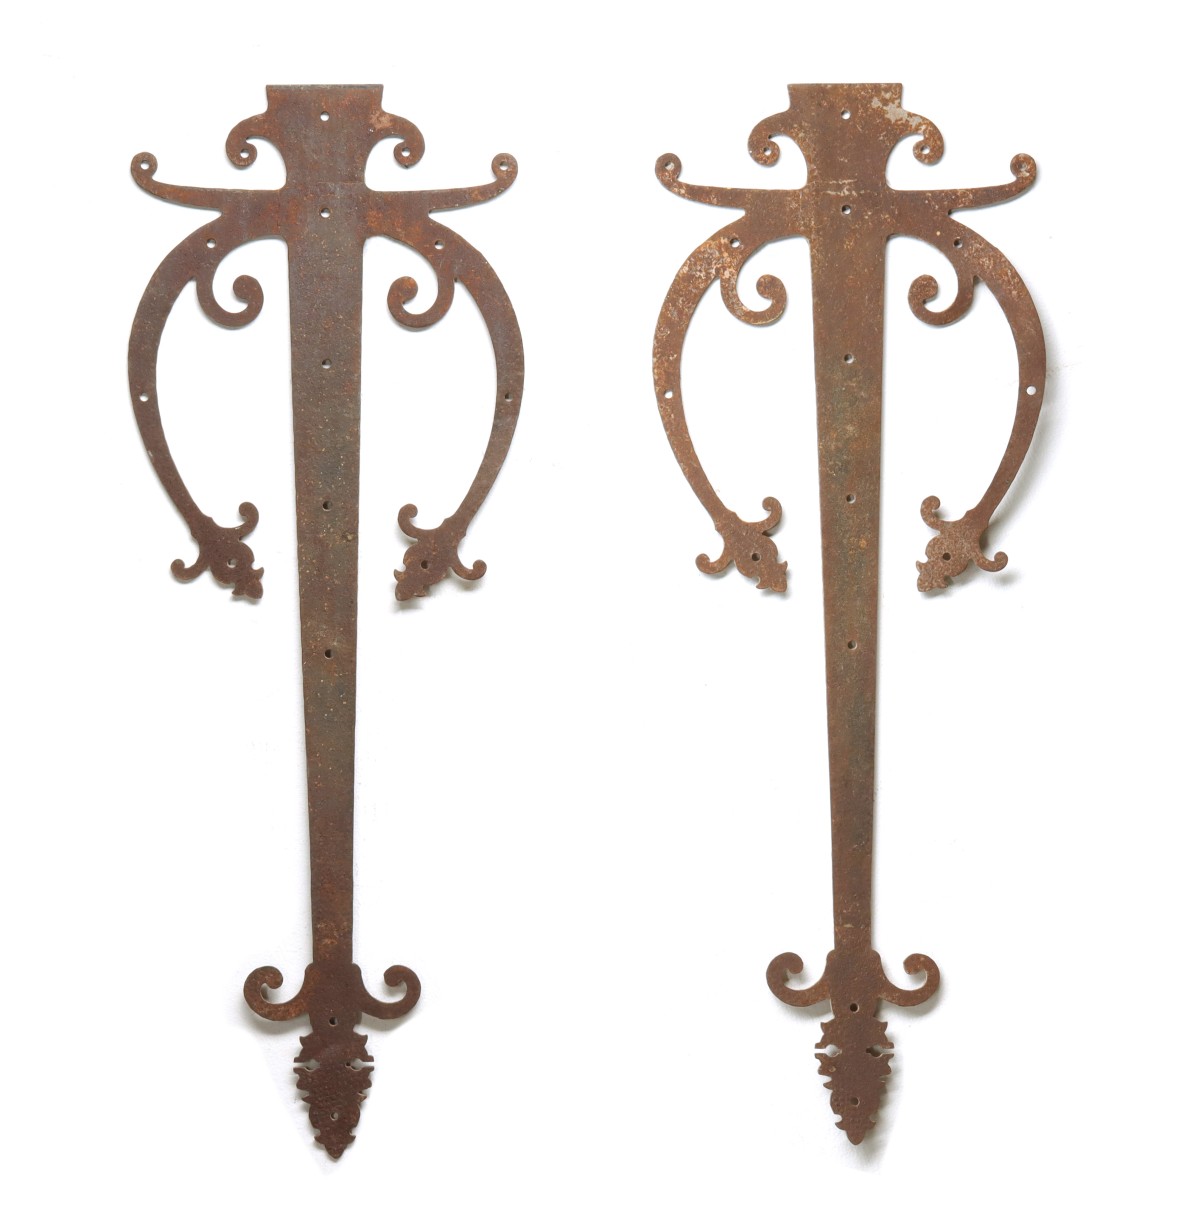 A FINE LARGE PAIR OF ORNATE FORGED IRON HINGES